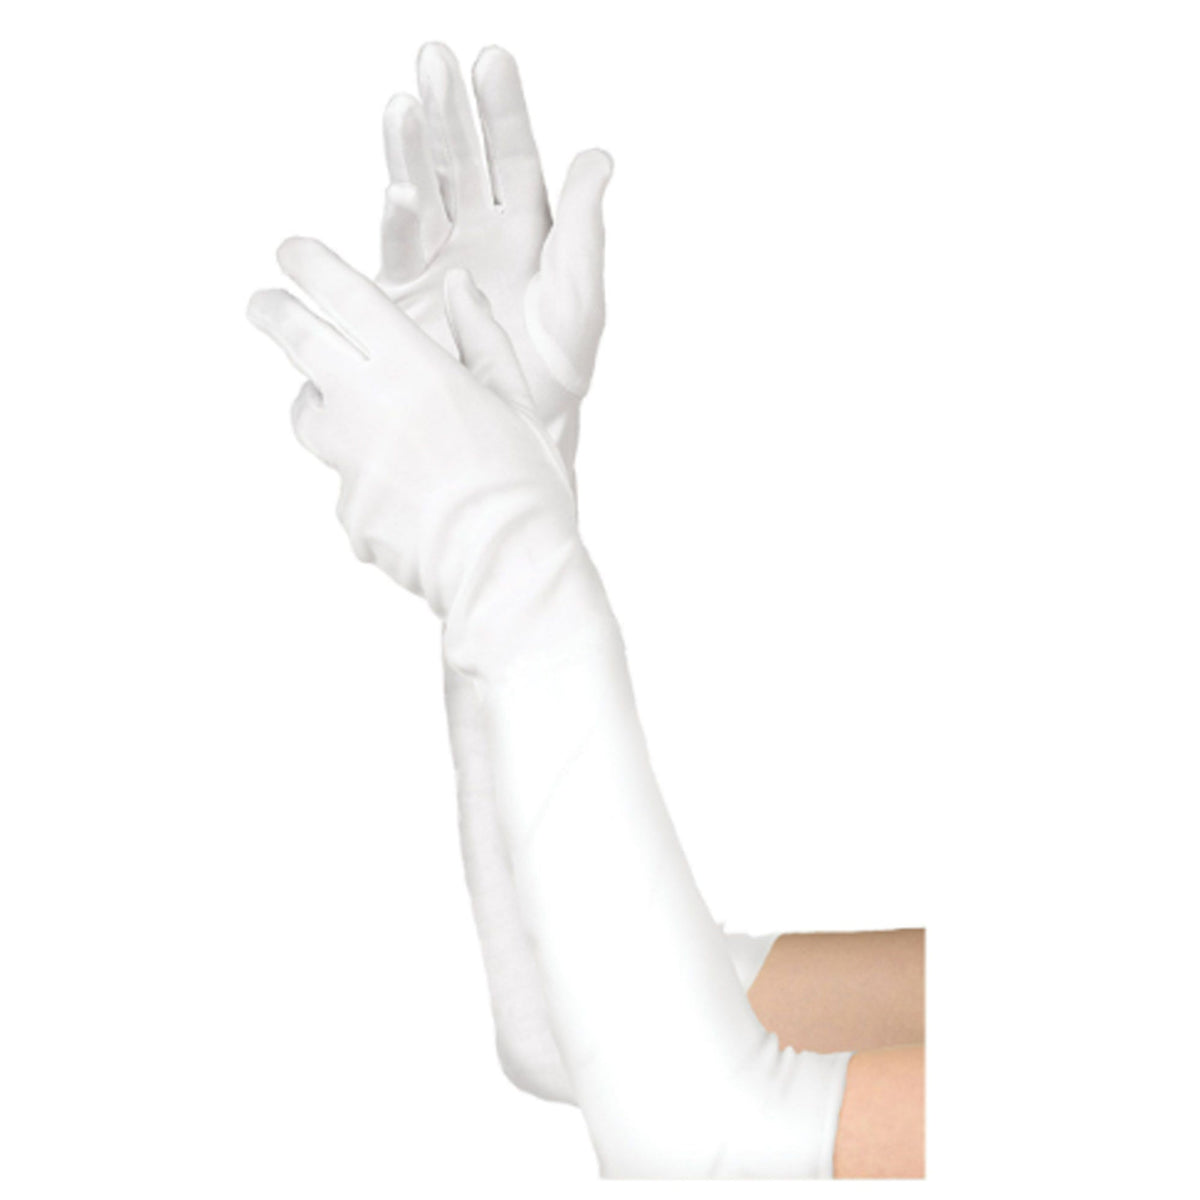 SUIT YOURSELF COSTUME CO. Costume Accessories White Long Gloves for Adults 809801701211